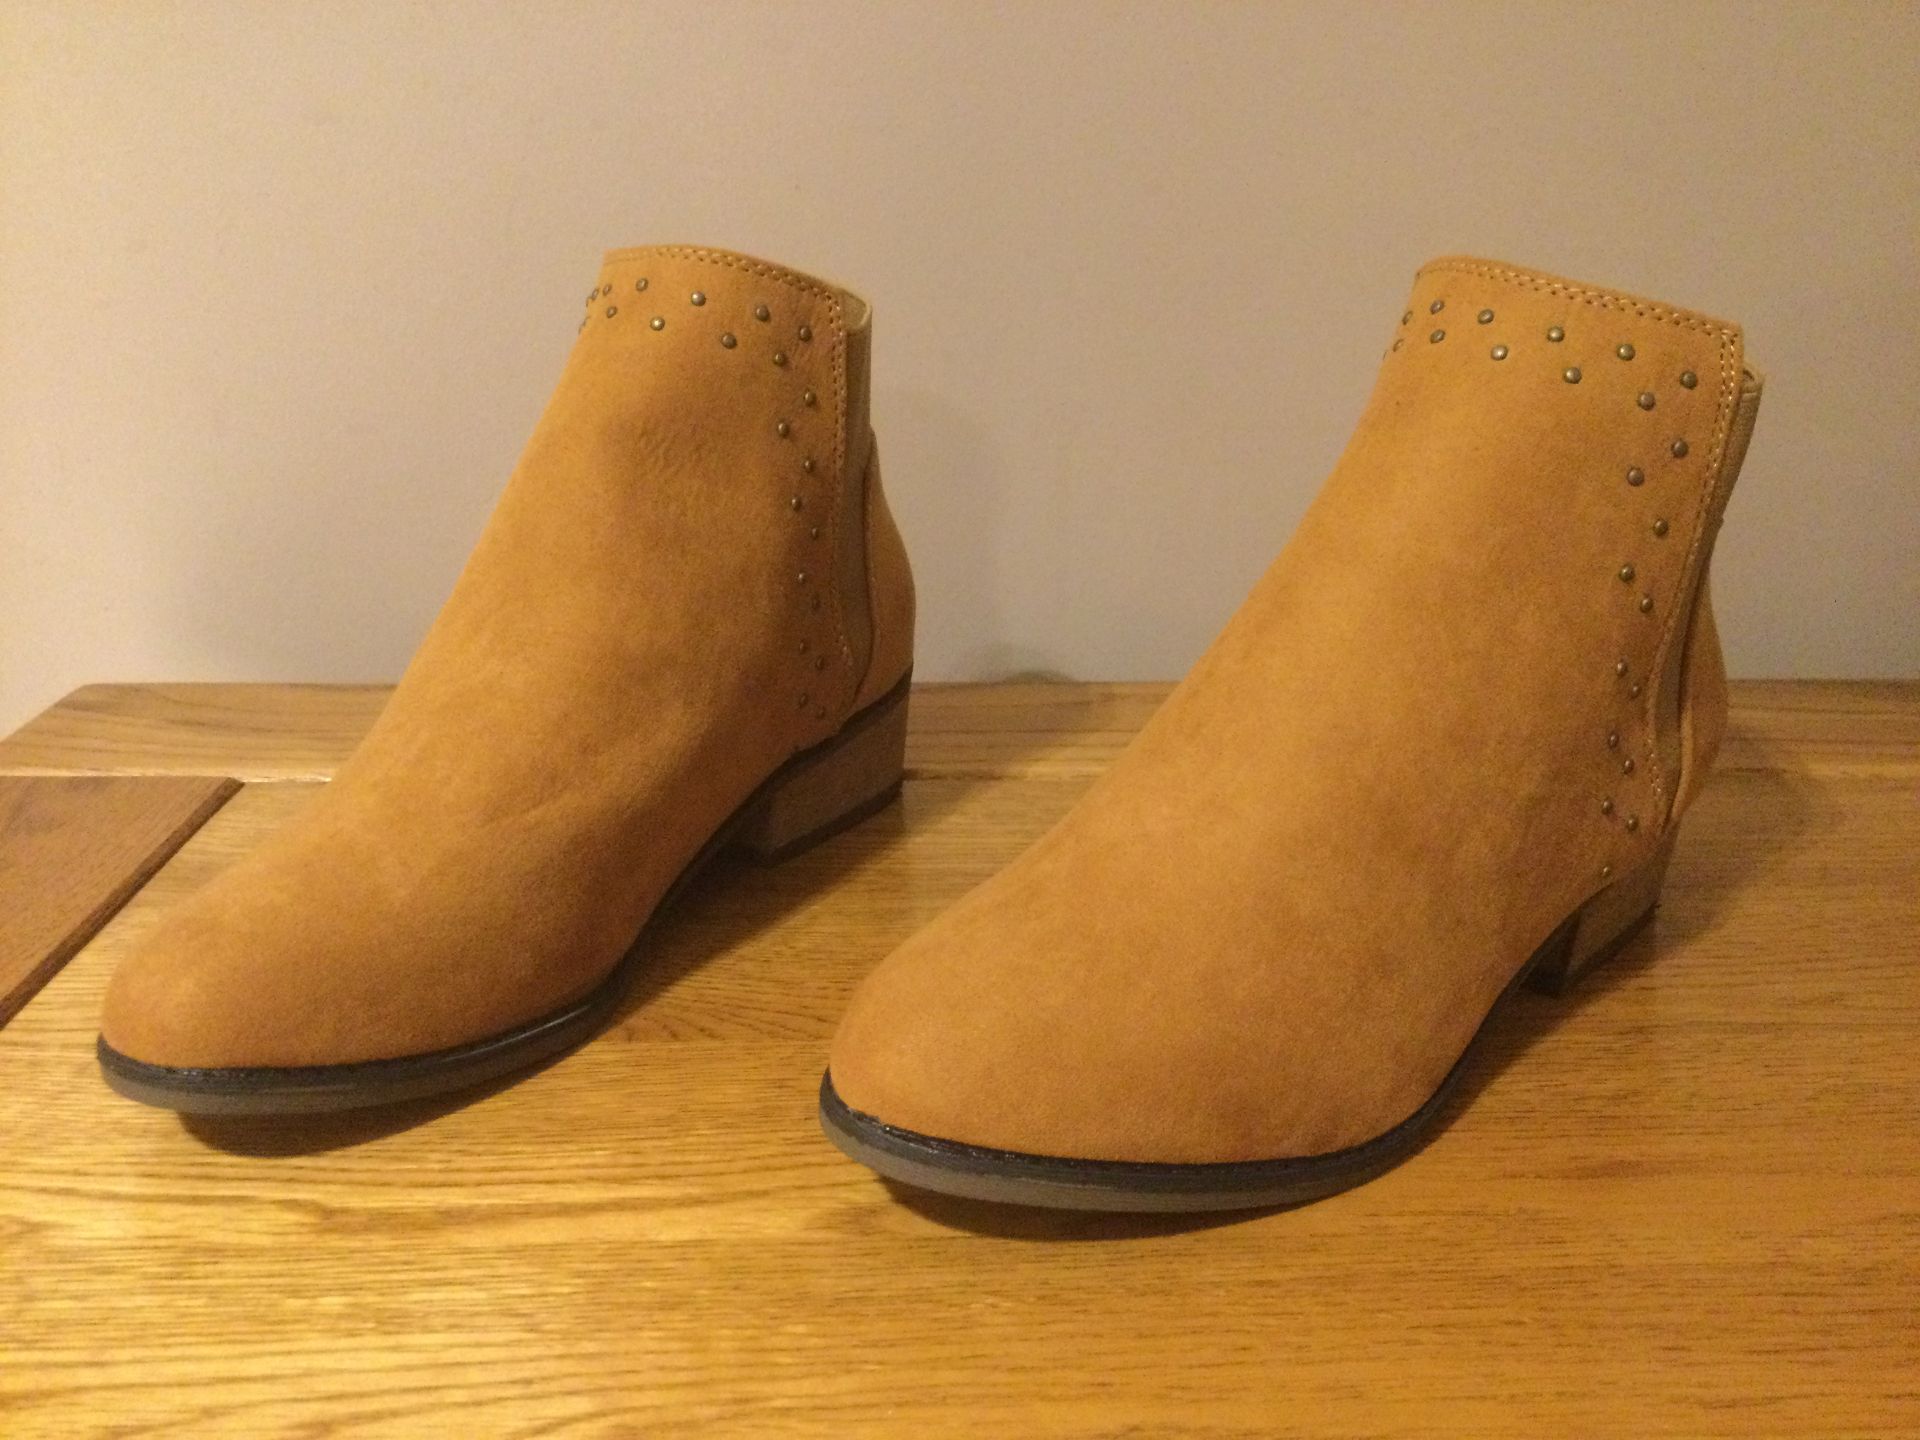 Dolcis “Wendy” Low Heel Ankle Boots, Size 6, Tan - New RRP £45.99 - Image 2 of 7